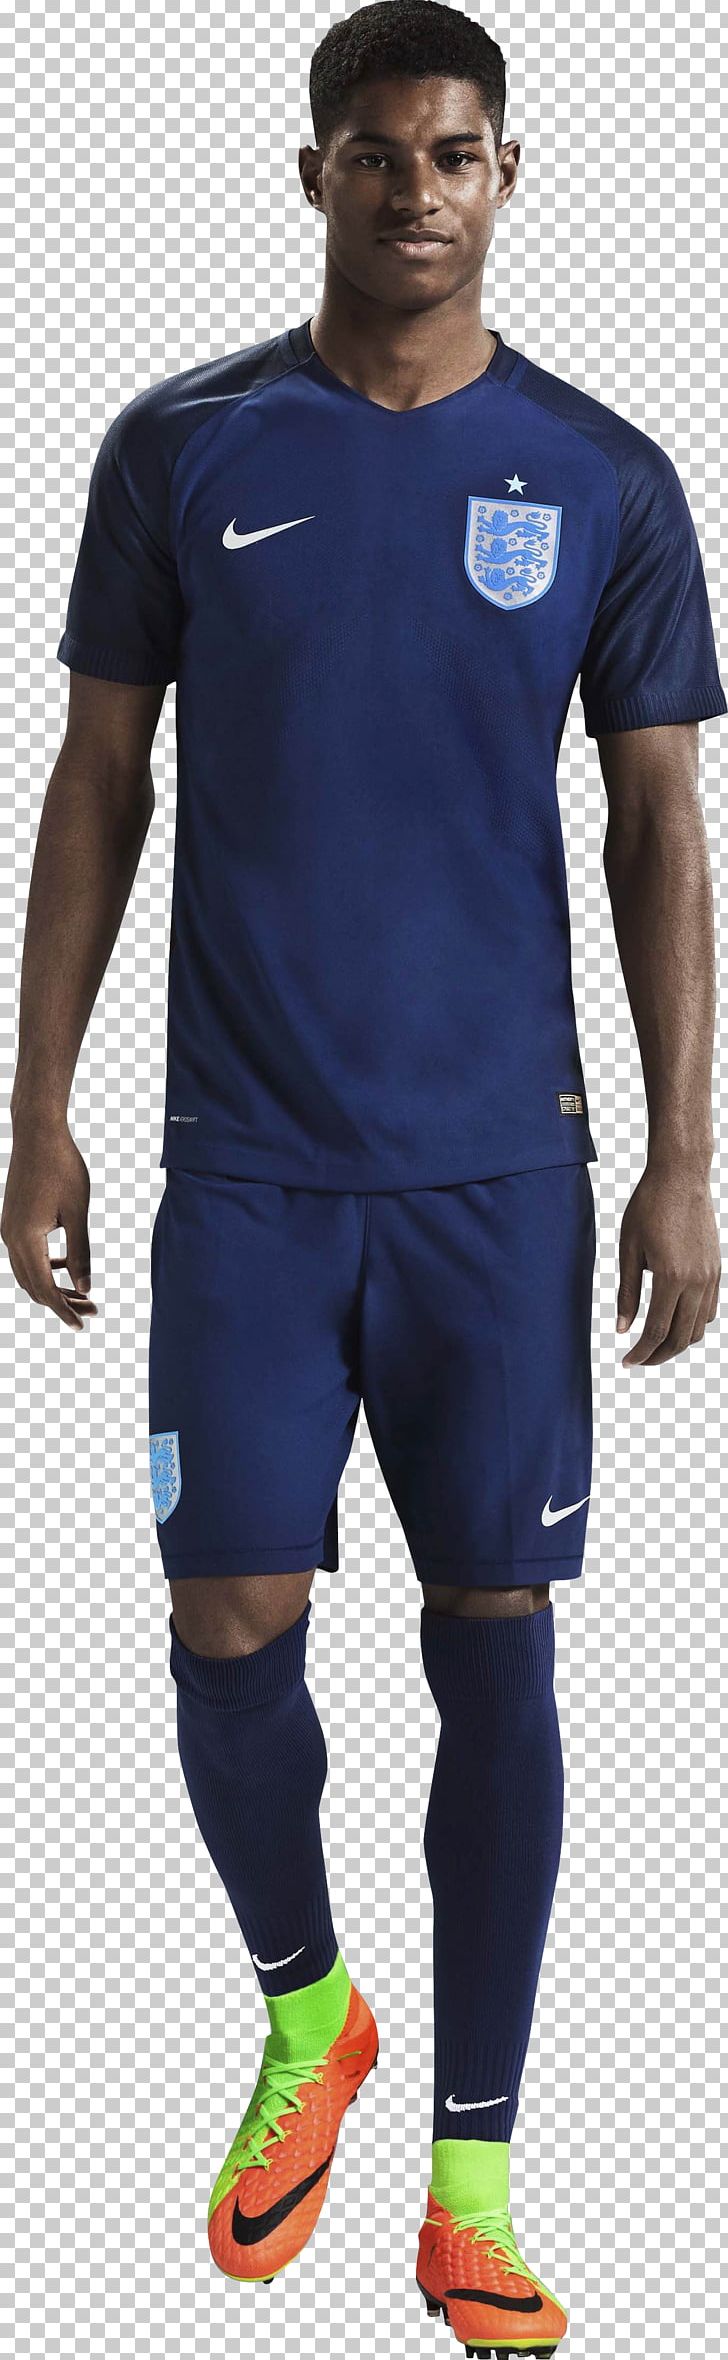 Marcus Rashford Jersey England National Football Team Sport PNG, Clipart, Blue, Clothing, Digital Art, Electric Blue, Football Player Free PNG Download